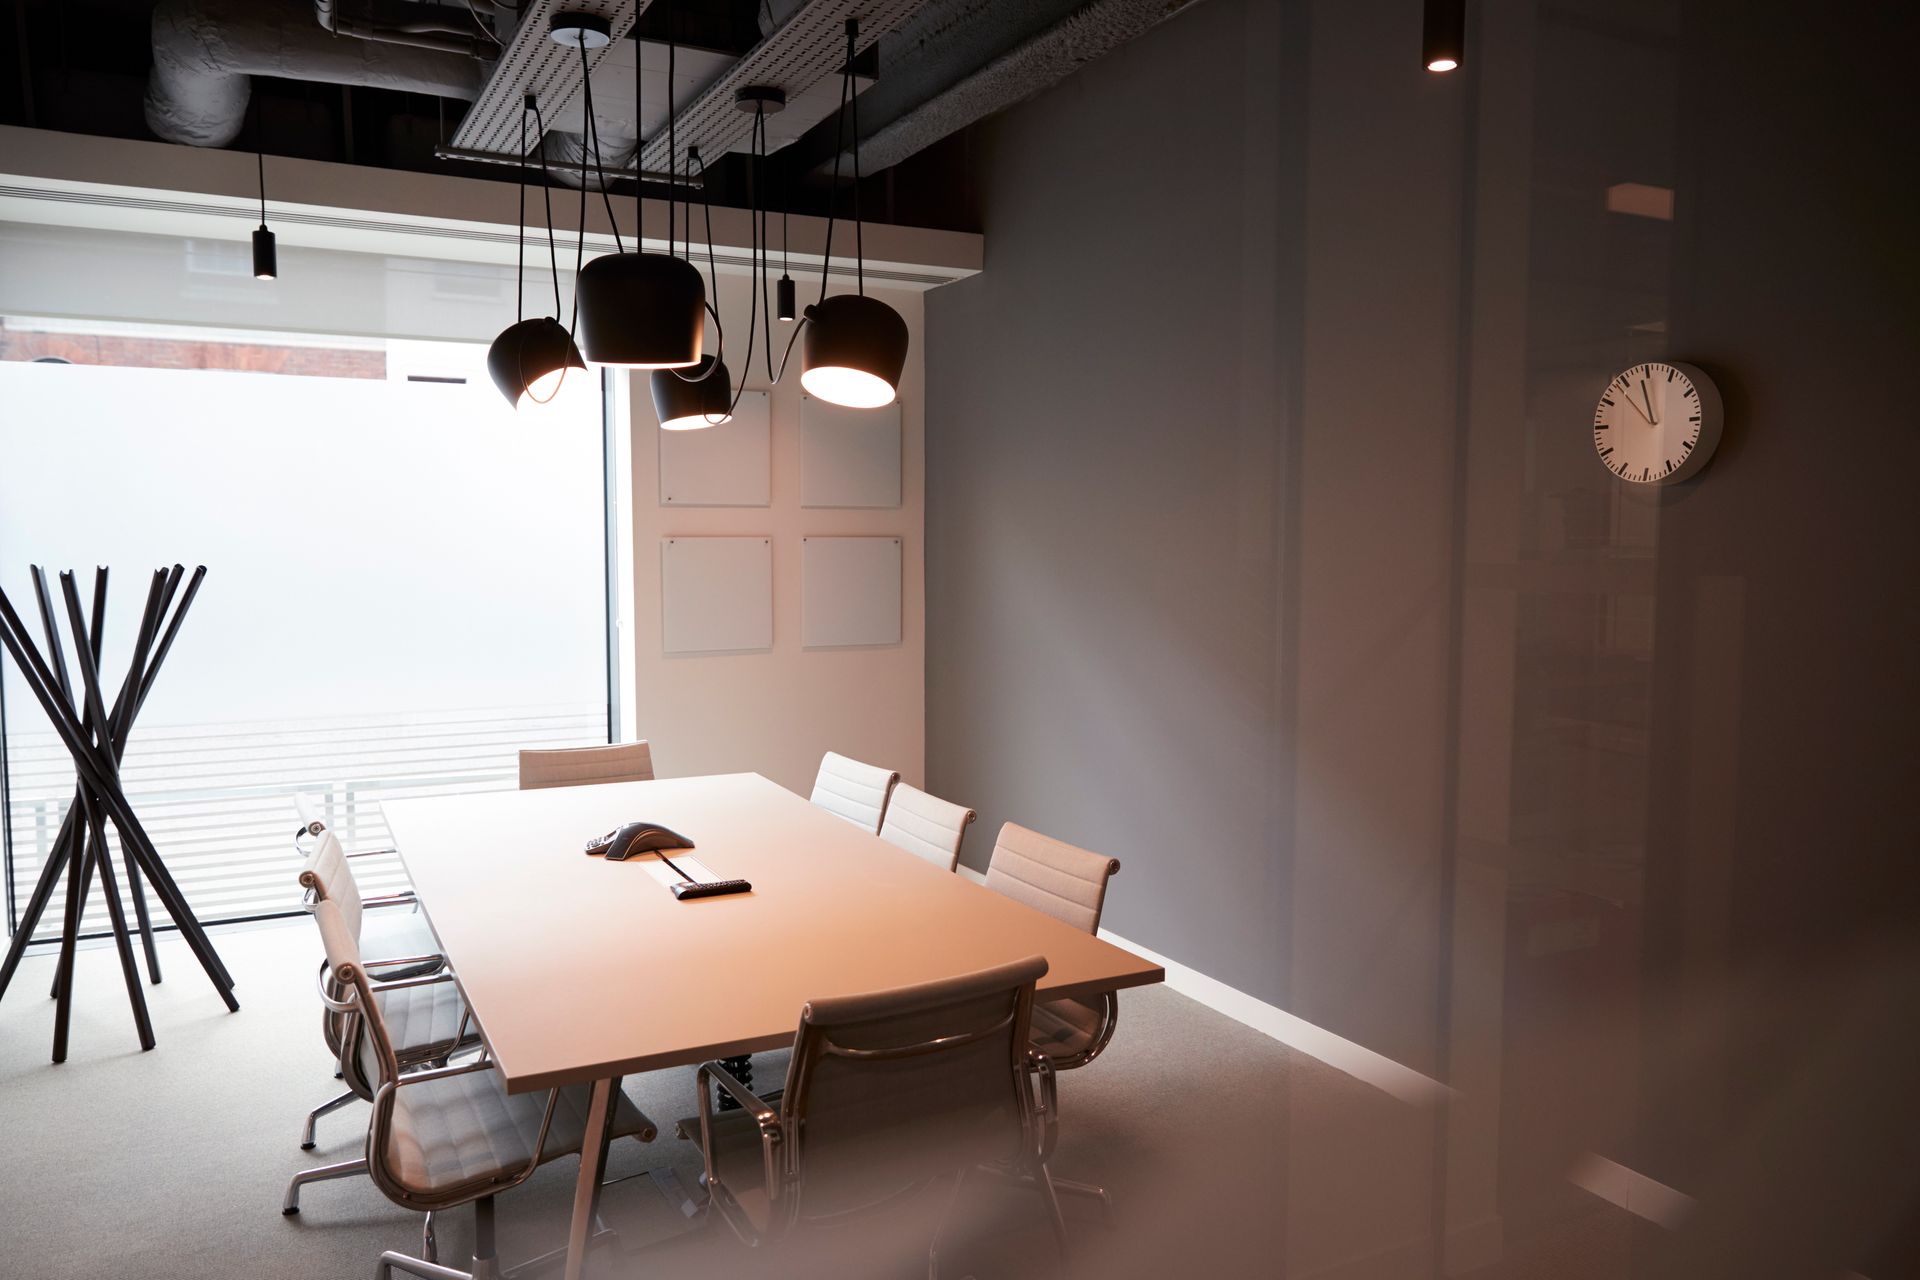 chairs around boardroom table in modern commercial space